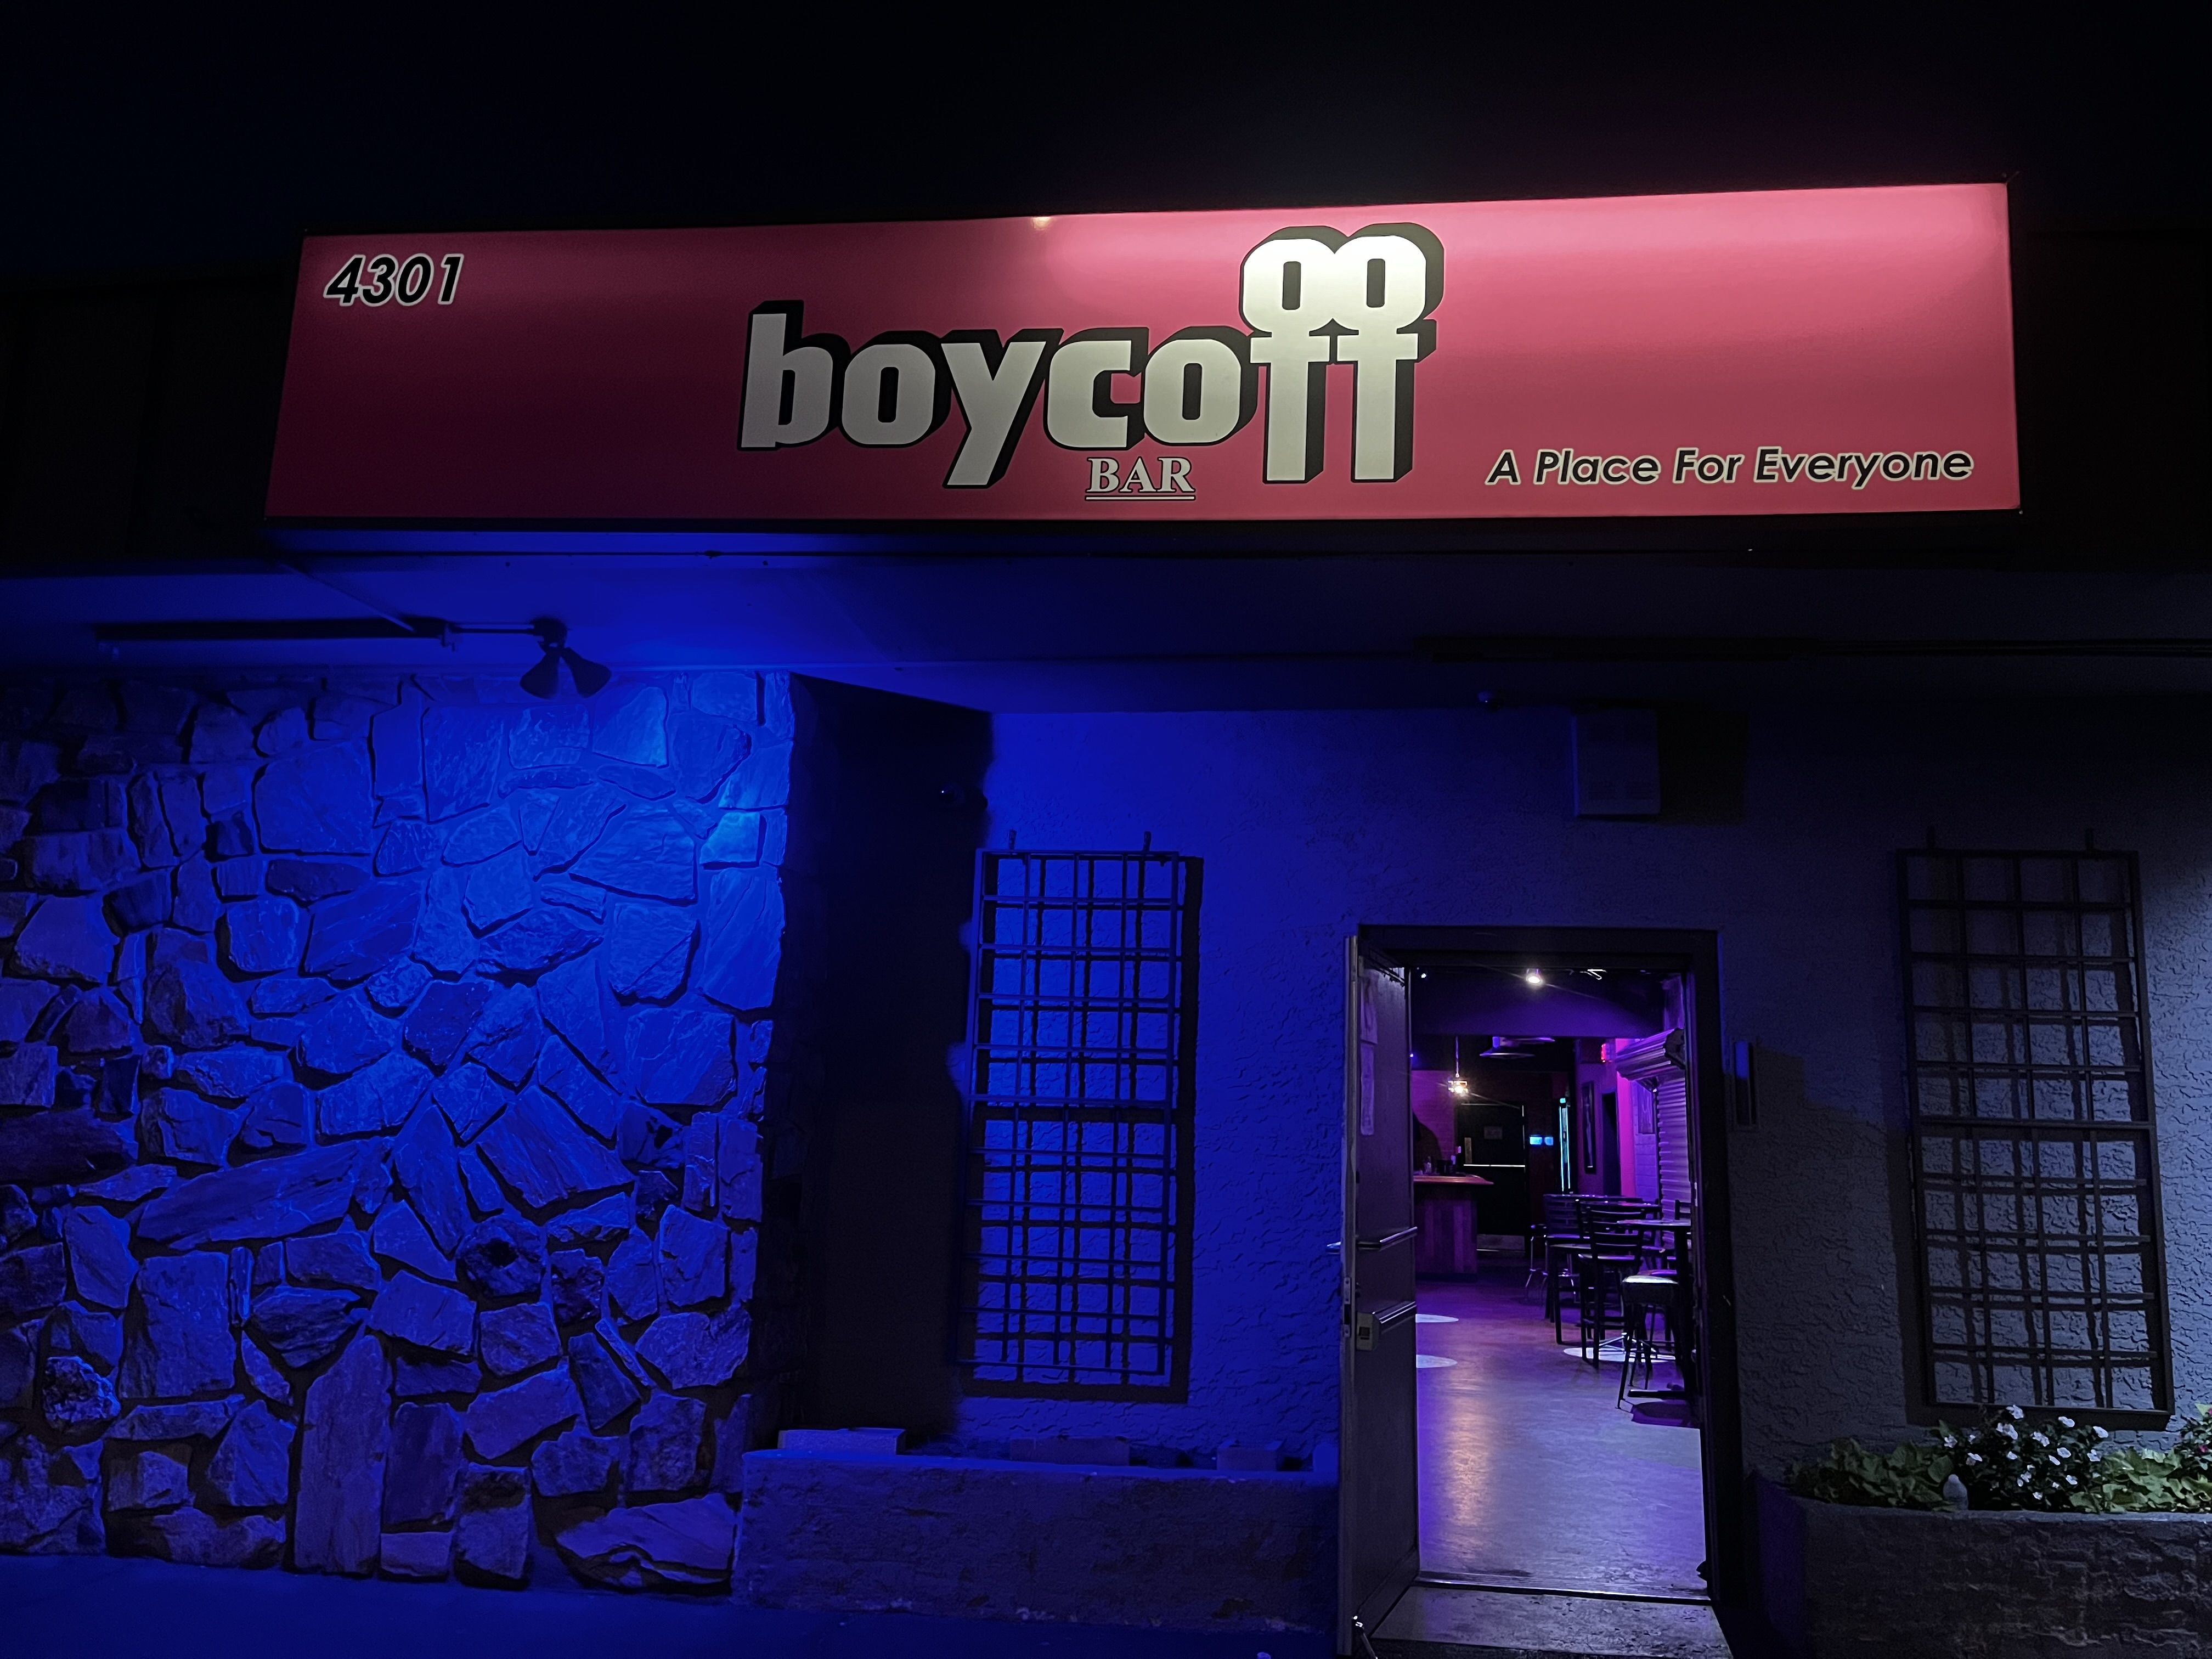 Boycott Bar's pink signs and lights surround an open doorway with more pink lights beckoning inside.